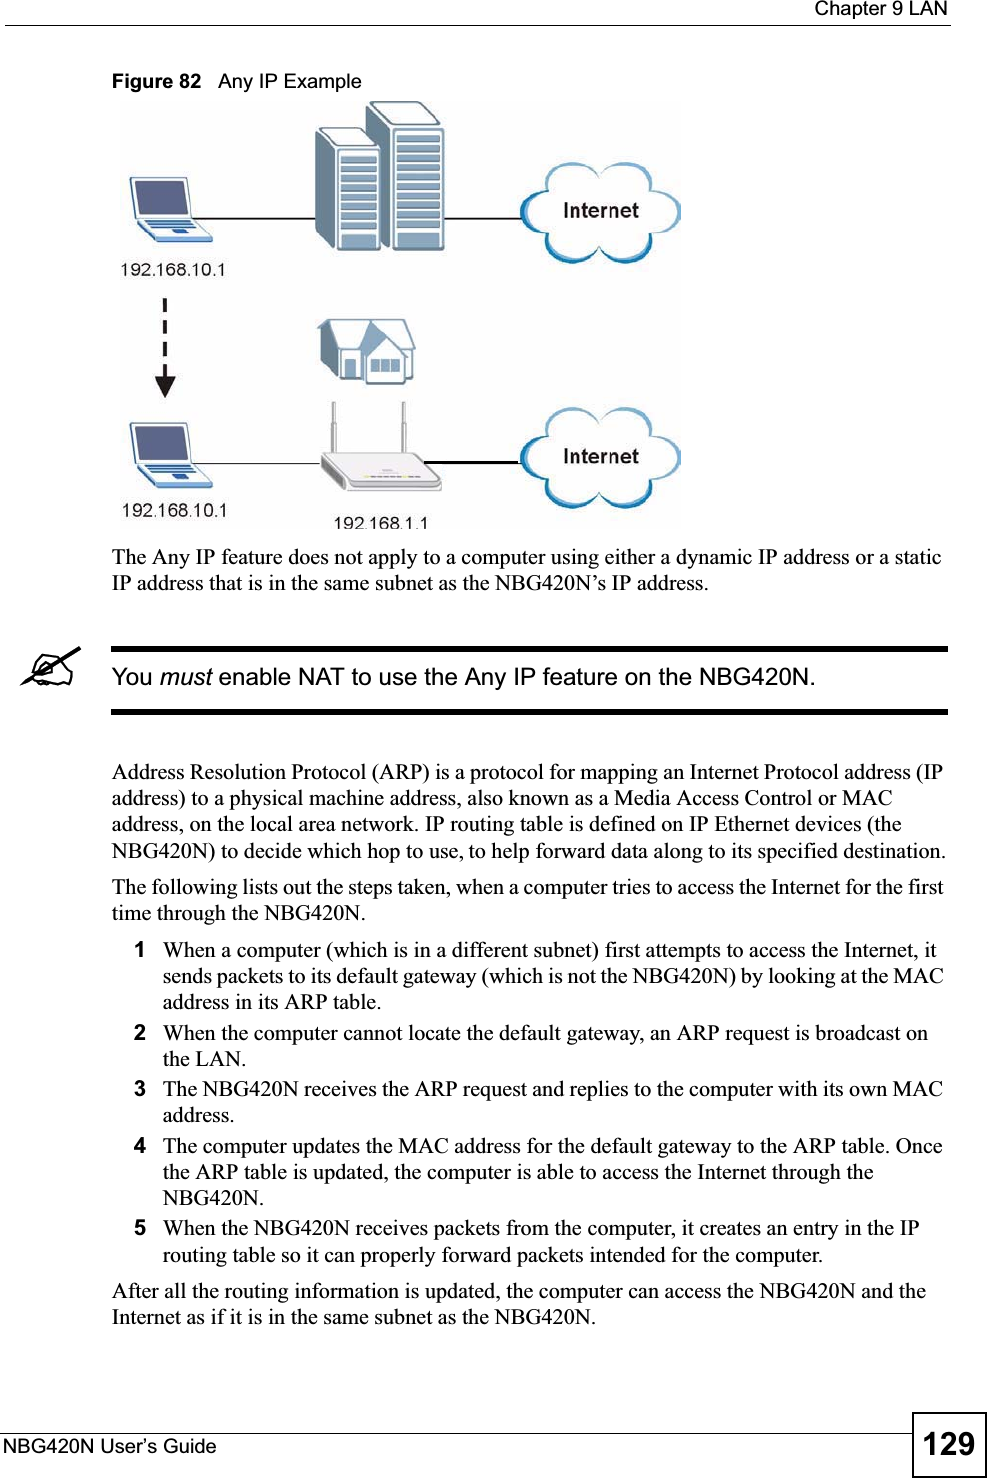  Chapter 9 LANNBG420N User’s Guide 129Figure 82   Any IP ExampleThe Any IP feature does not apply to a computer using either a dynamic IP address or a static IP address that is in the same subnet as the NBG420N’s IP address.&quot;You must enable NAT to use the Any IP feature on the NBG420N. Address Resolution Protocol (ARP) is a protocol for mapping an Internet Protocol address (IP address) to a physical machine address, also known as a Media Access Control or MAC address, on the local area network. IP routing table is defined on IP Ethernet devices (the NBG420N) to decide which hop to use, to help forward data along to its specified destination.The following lists out the steps taken, when a computer tries to access the Internet for the first time through the NBG420N.1When a computer (which is in a different subnet) first attempts to access the Internet, it sends packets to its default gateway (which is not the NBG420N) by looking at the MAC address in its ARP table. 2When the computer cannot locate the default gateway, an ARP request is broadcast on the LAN. 3The NBG420N receives the ARP request and replies to the computer with its own MAC address. 4The computer updates the MAC address for the default gateway to the ARP table. Once the ARP table is updated, the computer is able to access the Internet through the NBG420N.5When the NBG420N receives packets from the computer, it creates an entry in the IP routing table so it can properly forward packets intended for the computer. After all the routing information is updated, the computer can access the NBG420N and the Internet as if it is in the same subnet as the NBG420N. 